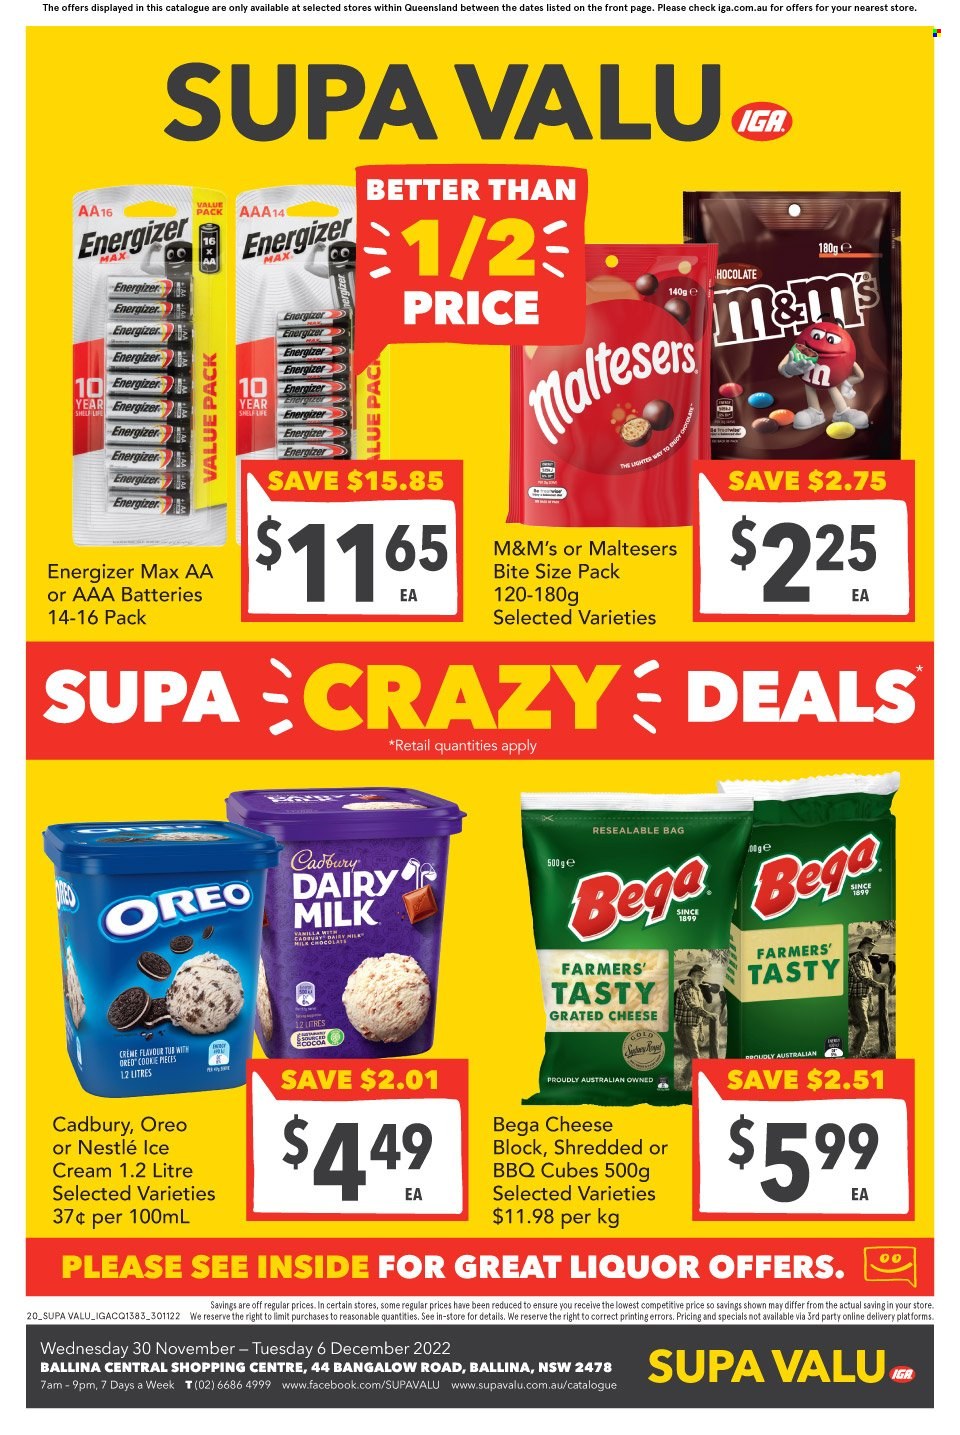 thumbnail - SUPA VALU Catalogue - 30 Nov 2022 - 6 Dec 2022 - Sales products - cheese, grated cheese, ice cream, Nestlé, M&M's, Maltesers, Cadbury, Dairy Milk, liquor, battery, Energizer, AAA batteries. Page 2.